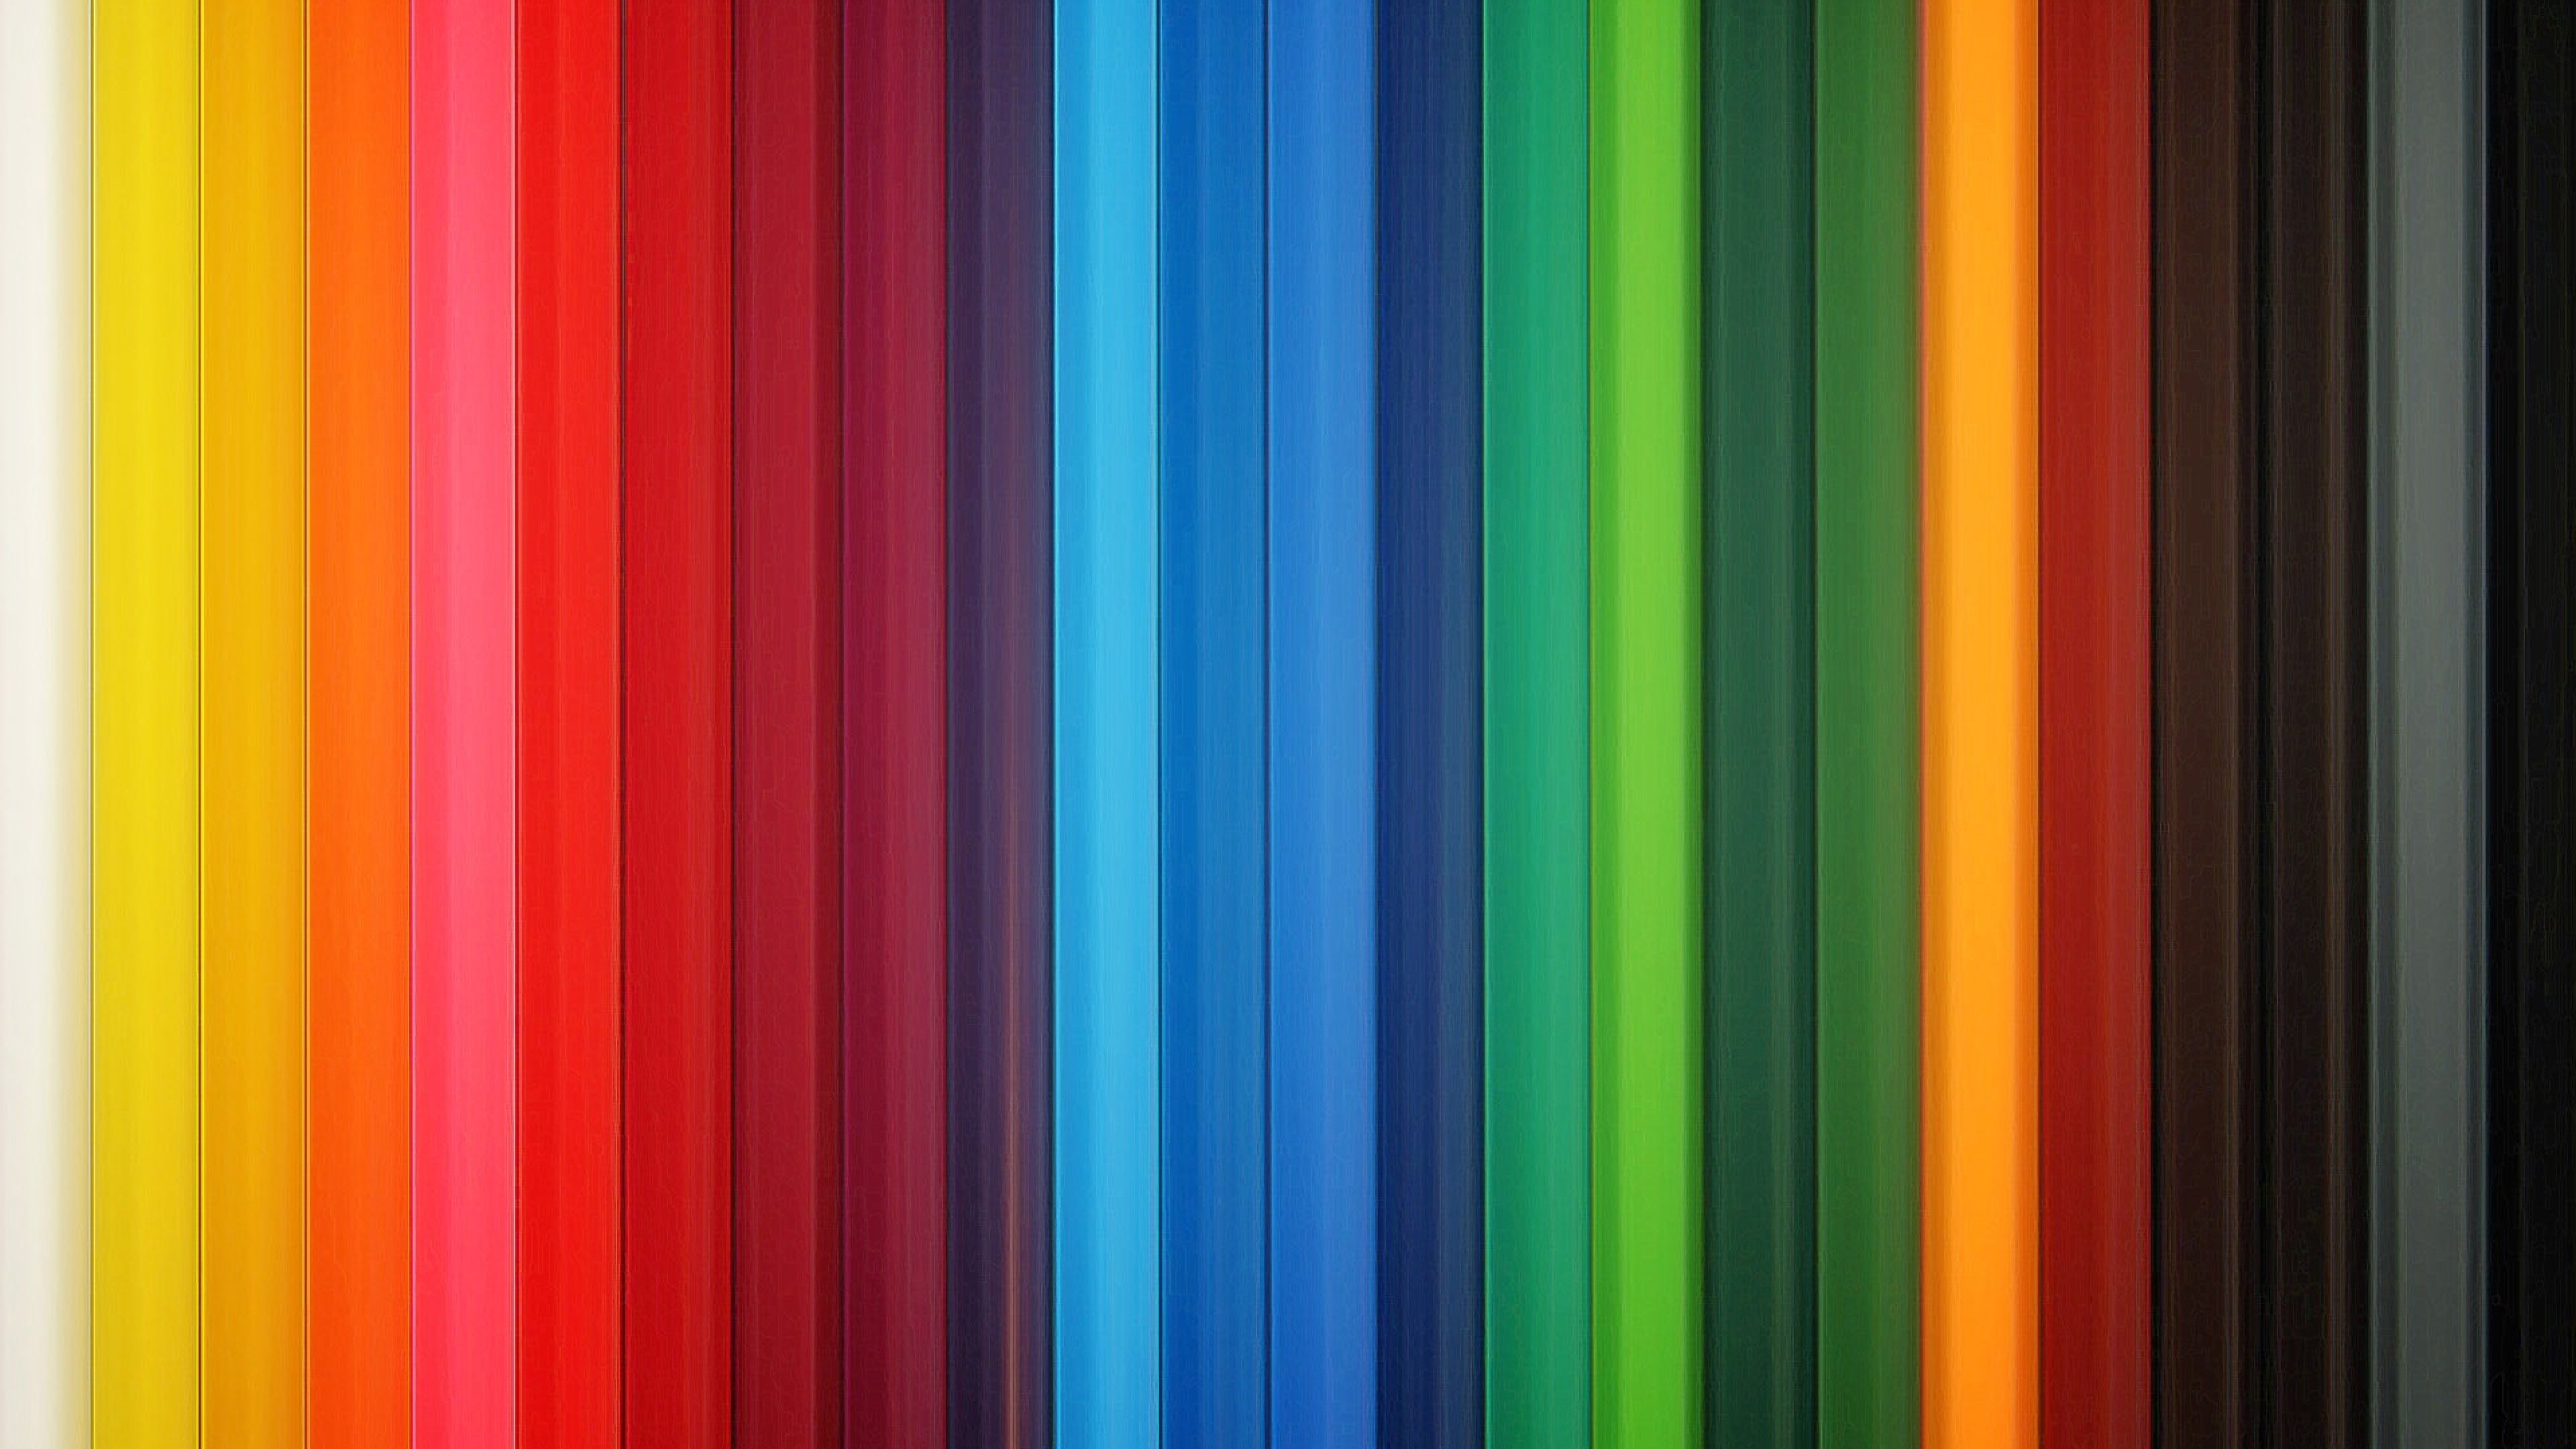 3840x2160 Wallpaper colorful stripes rainbow vertical